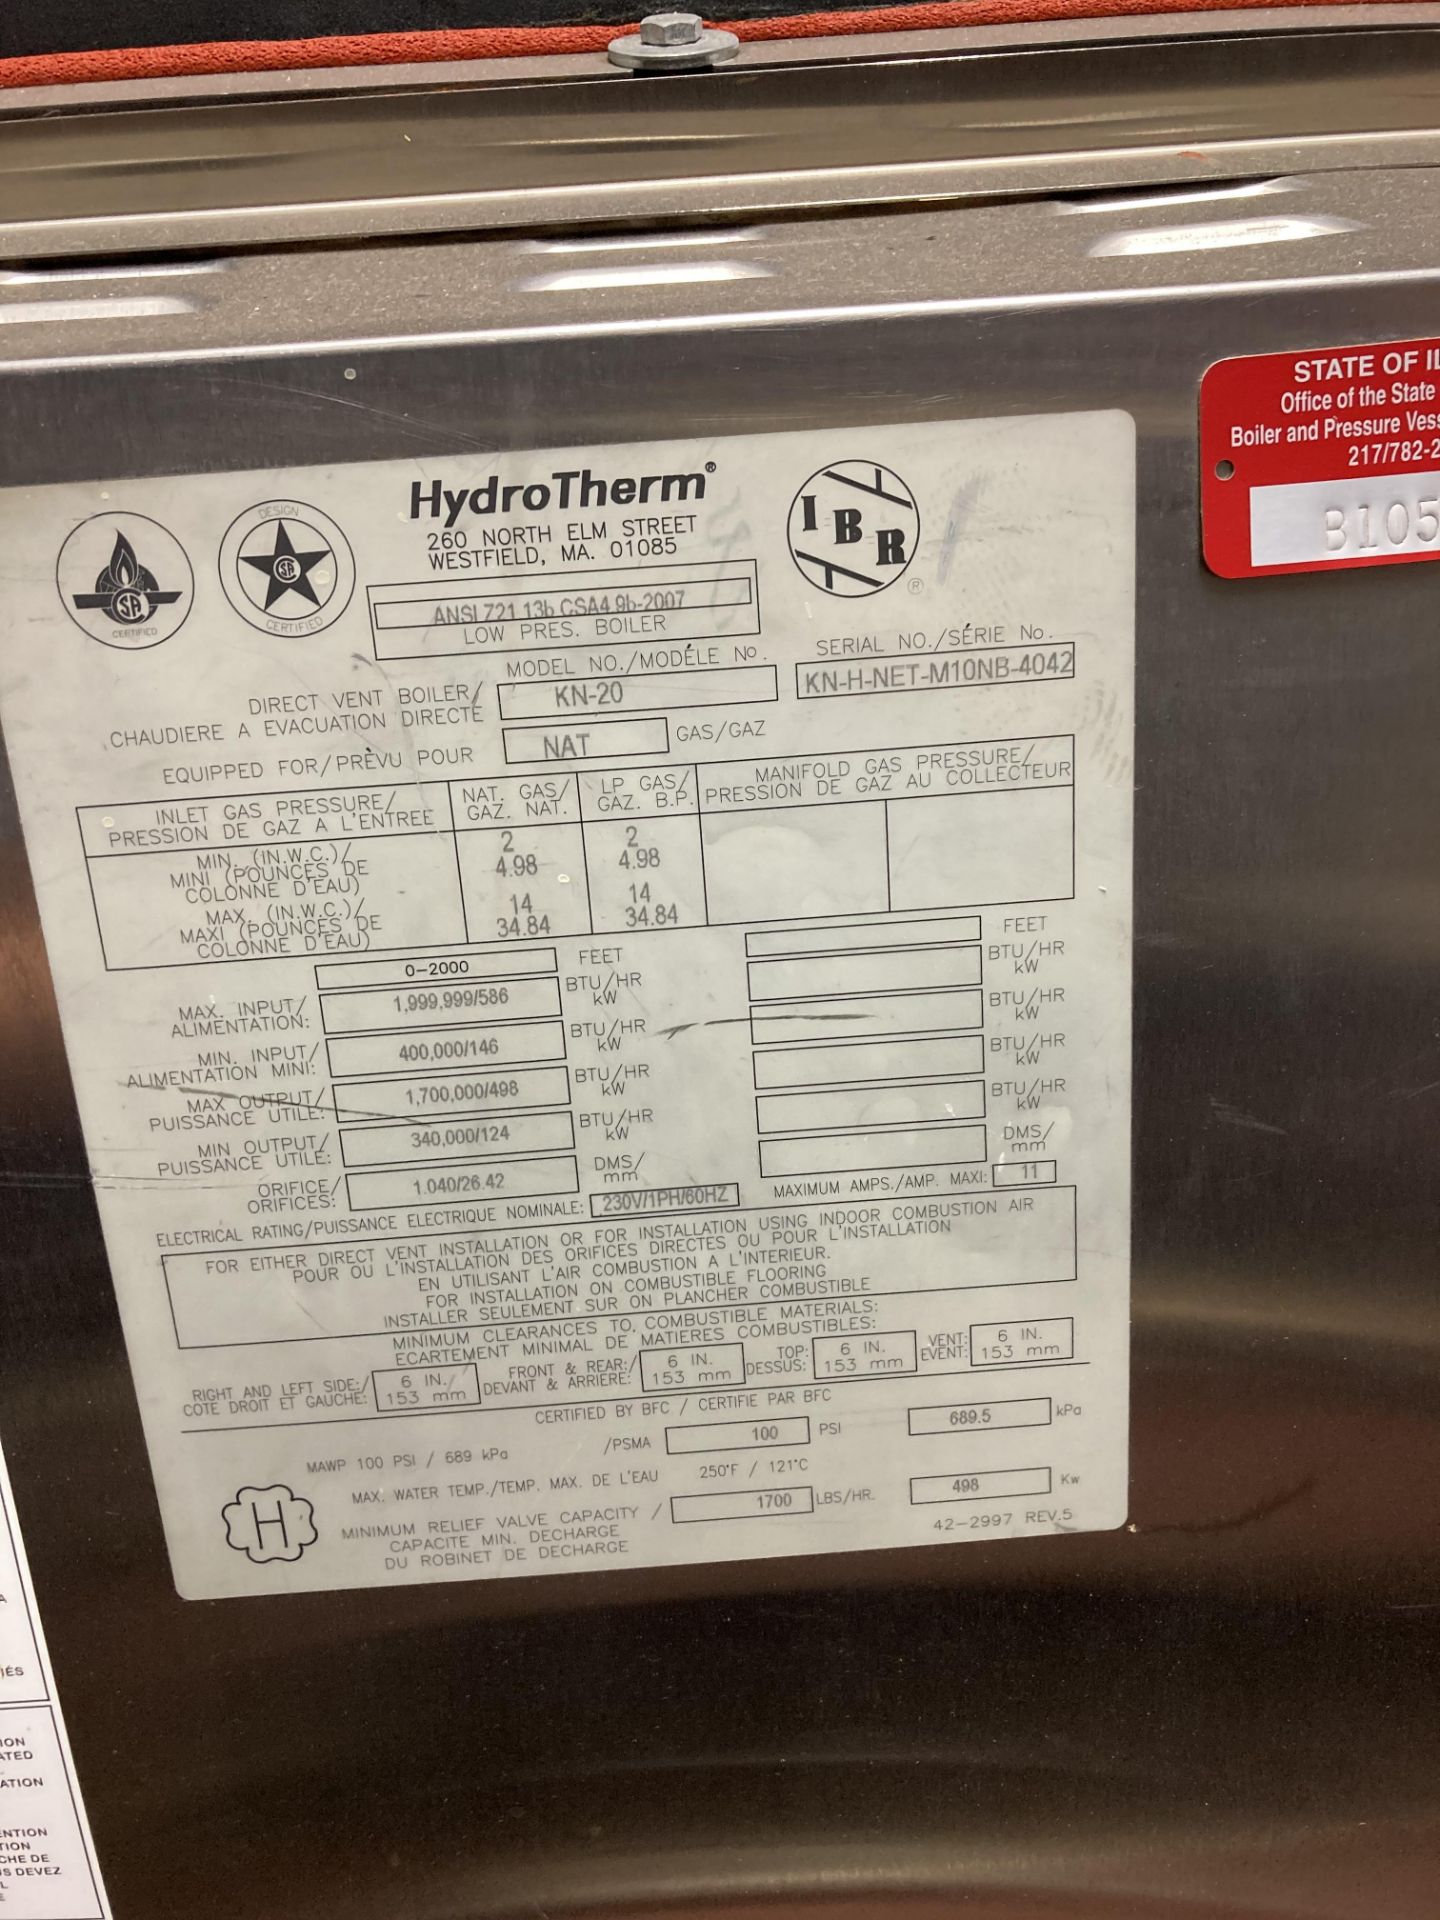 Hydrotherm KN-20 low pressure boiler, sn:KN-H-NET-M10NB-4042, natural gas - Image 3 of 3